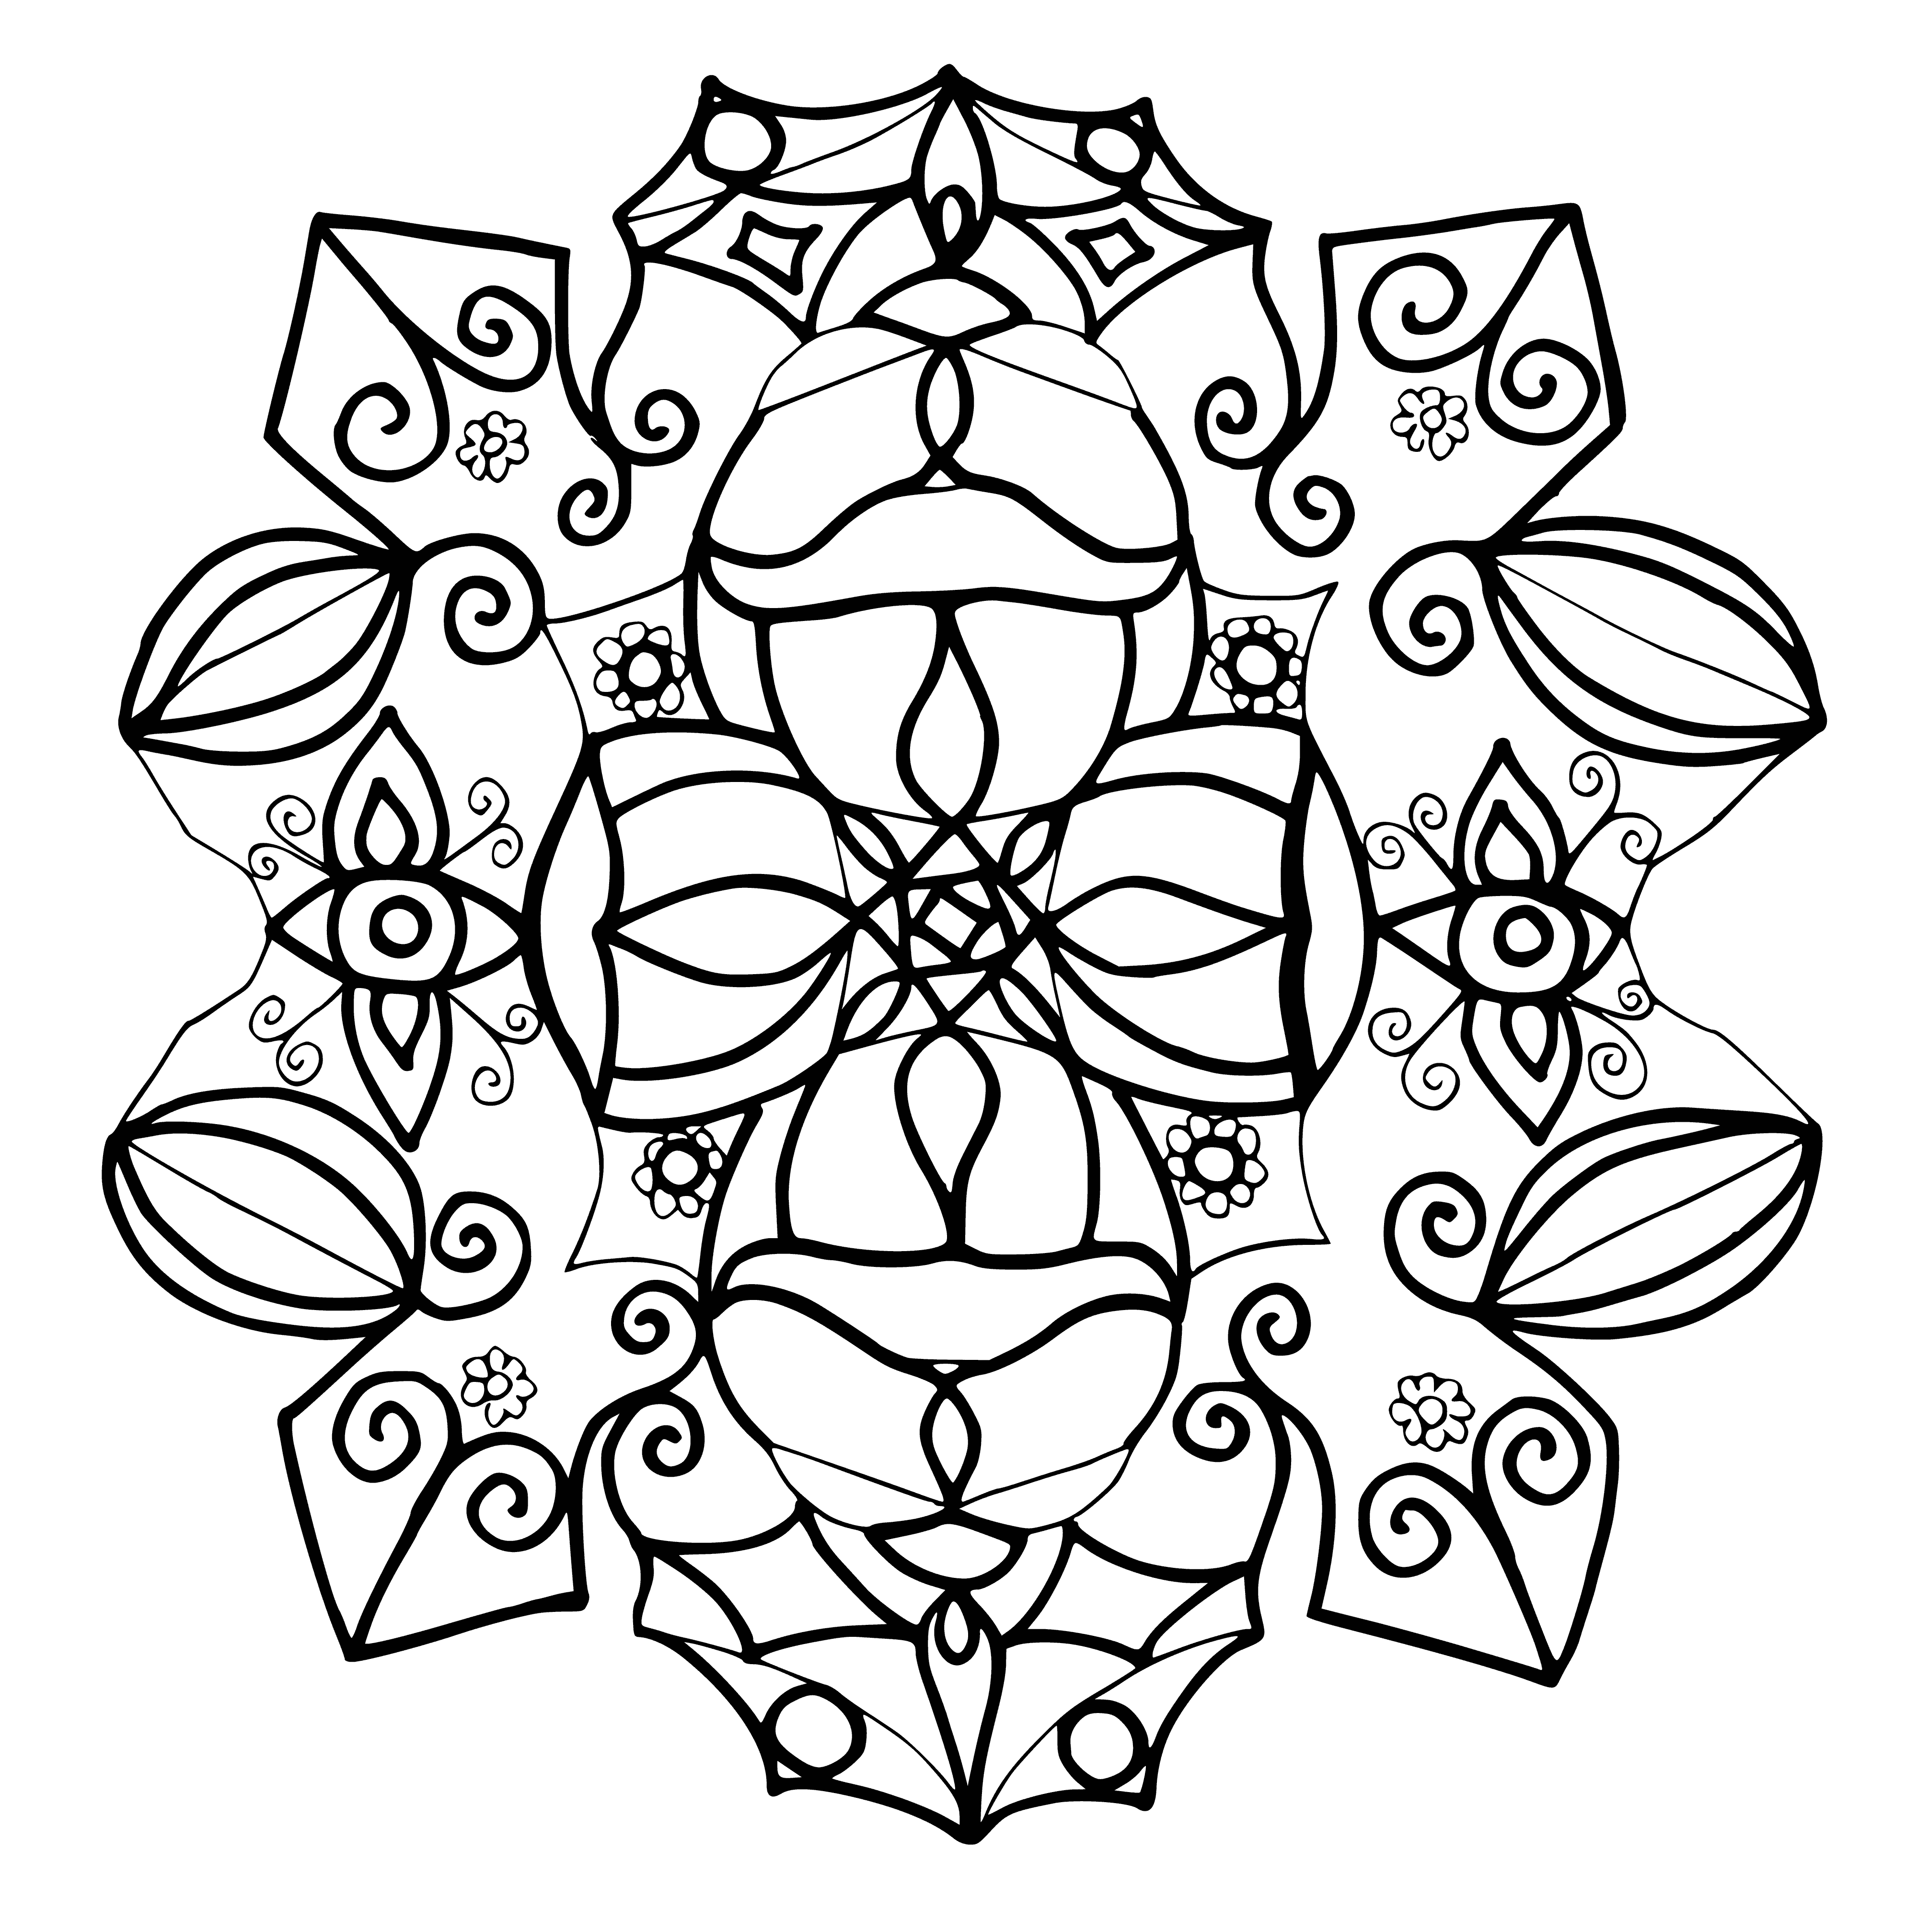 coloring page: Glittery paper snowflakes in various sizes on a pale blue background - a wintery wonderland!